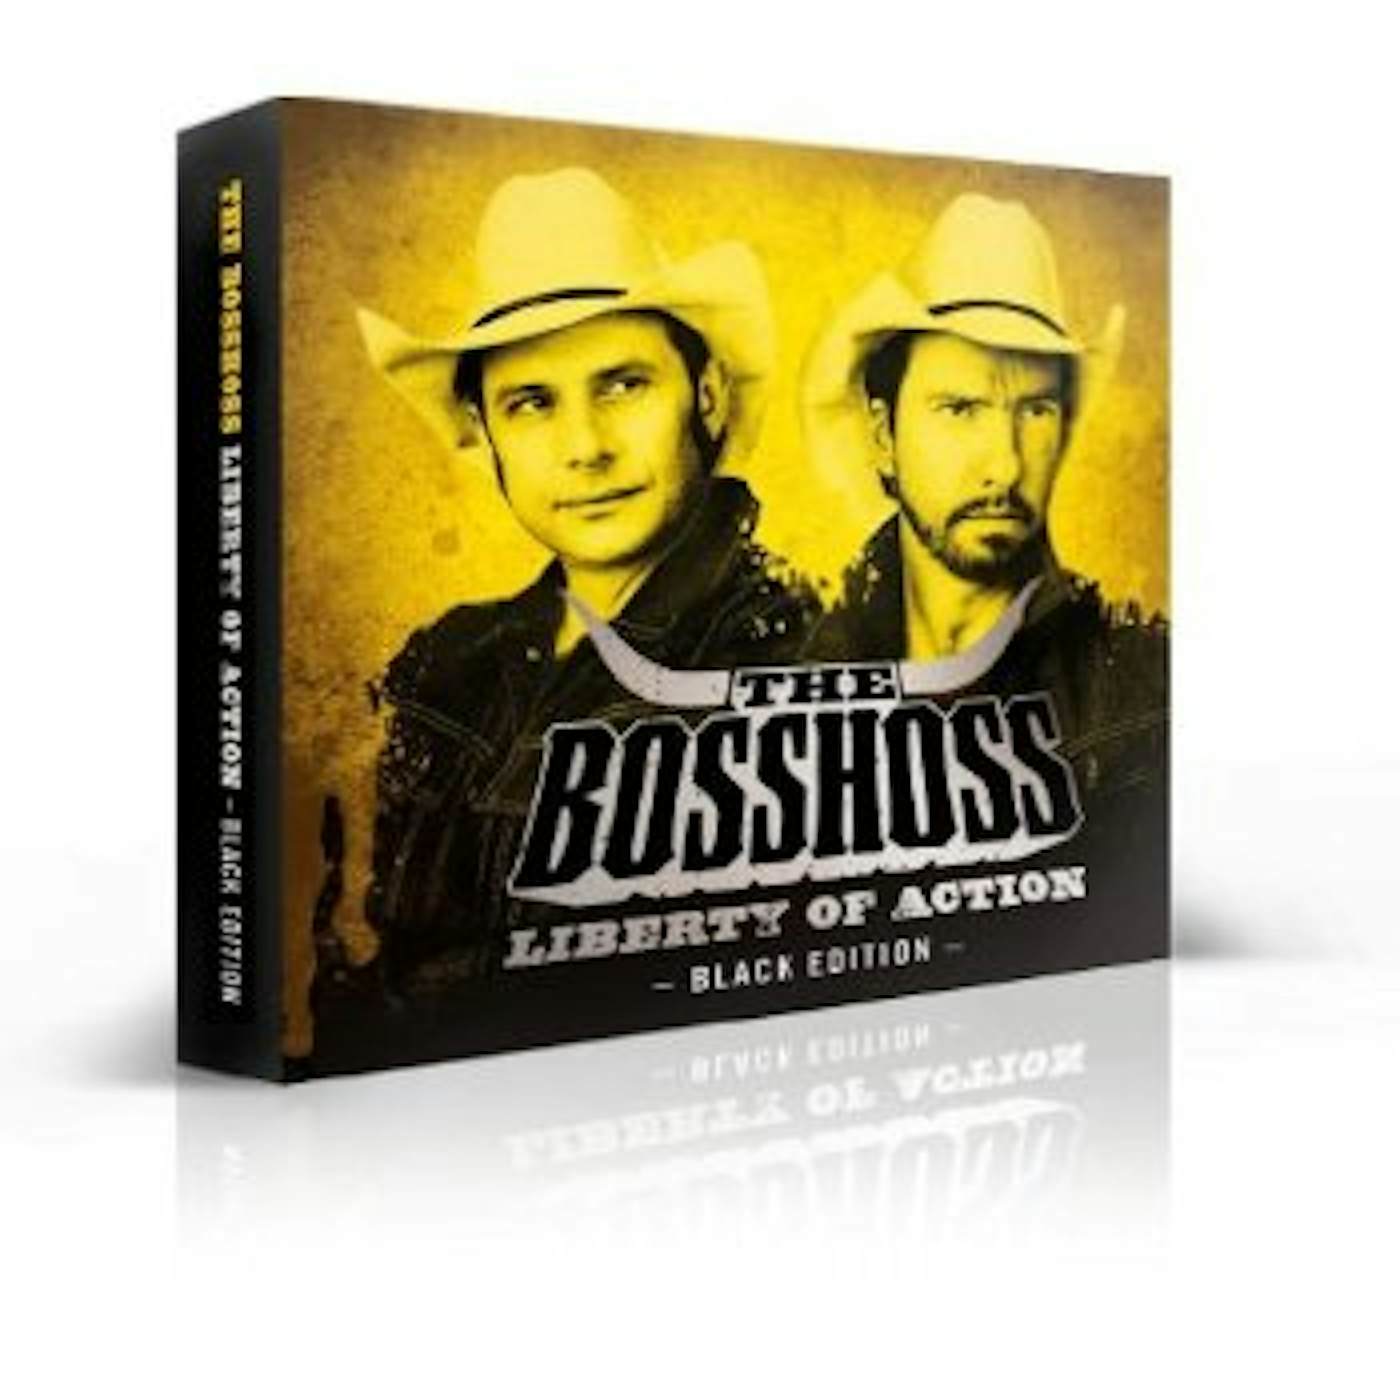 The BossHoss LIBERTY OF ACTION (DELUXE BLACK EDITION) CD